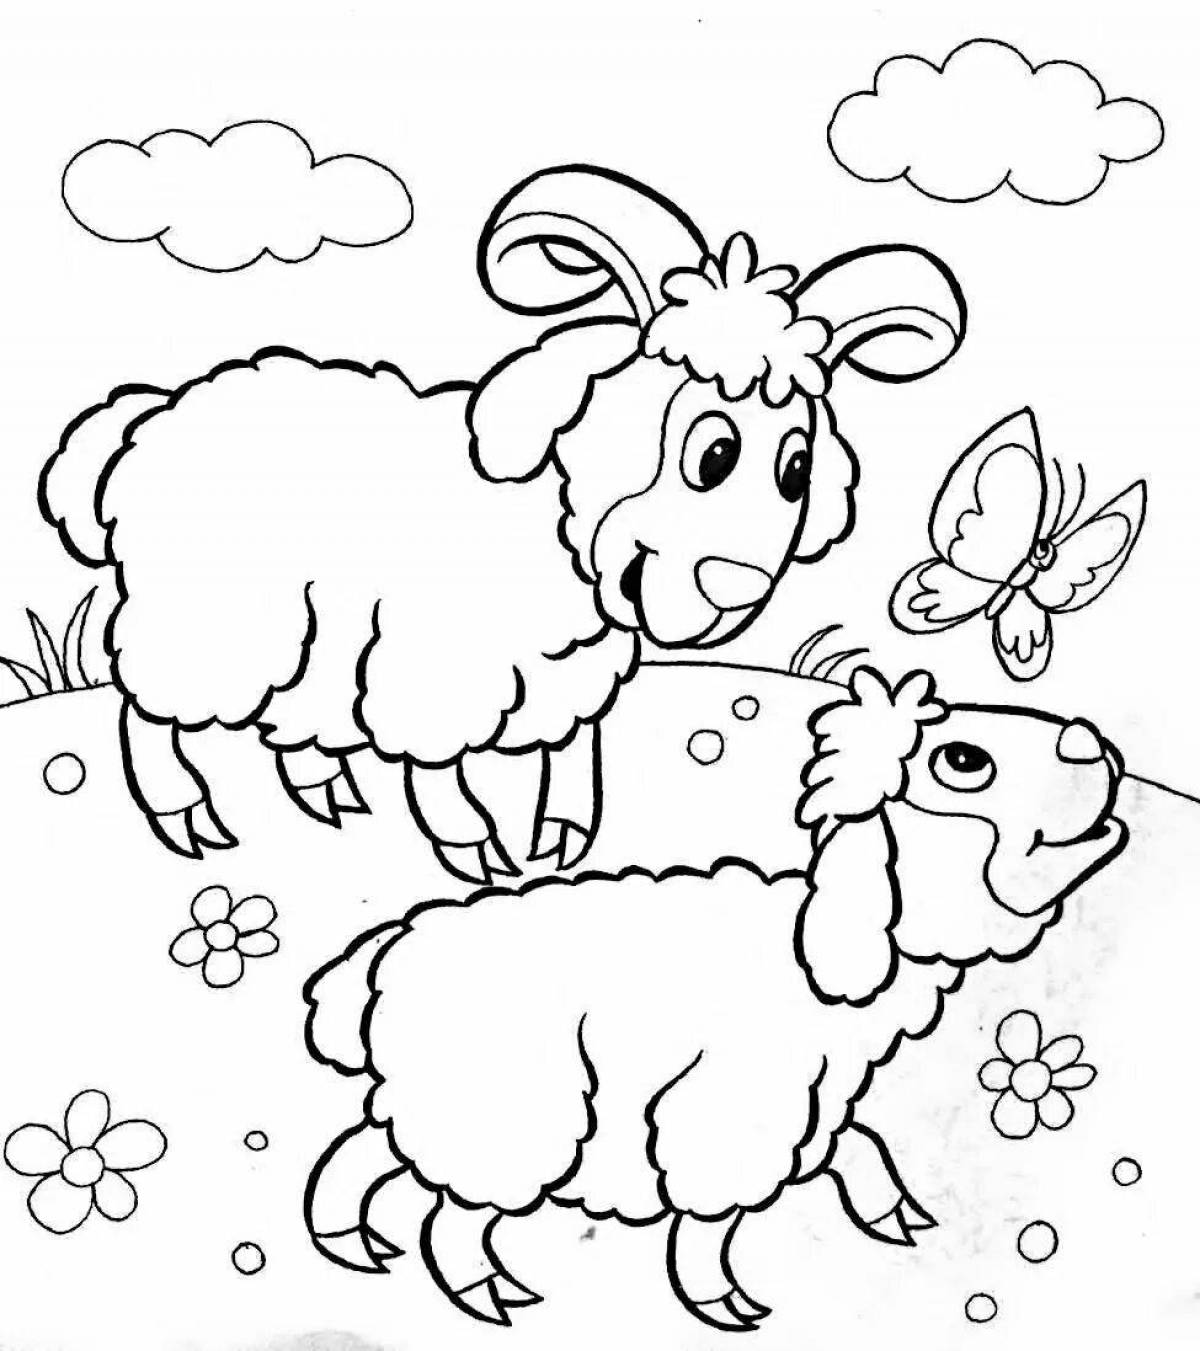 Radiant pet coloring pages for kids 5-7 years old